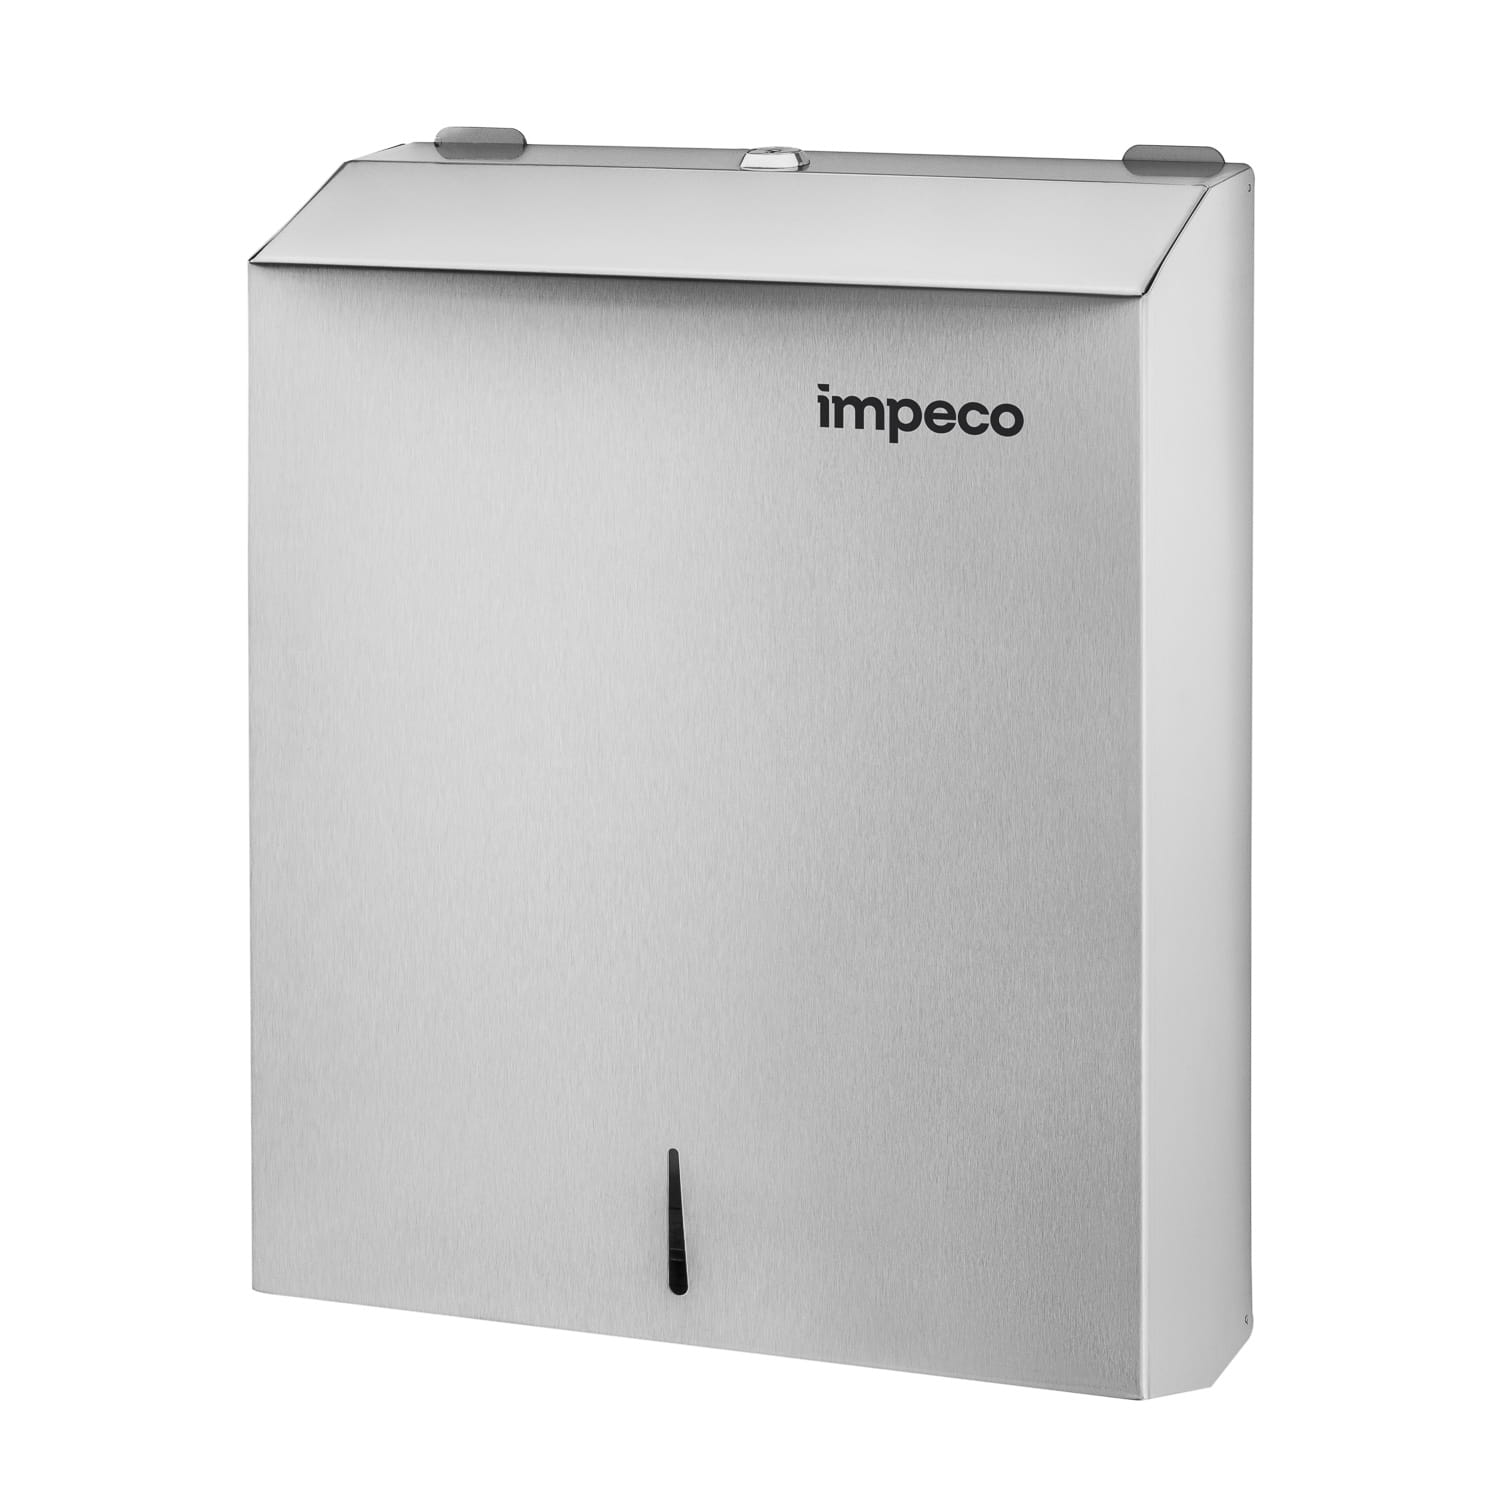 Towel dispenser Maxi, Impeco - stainless steel